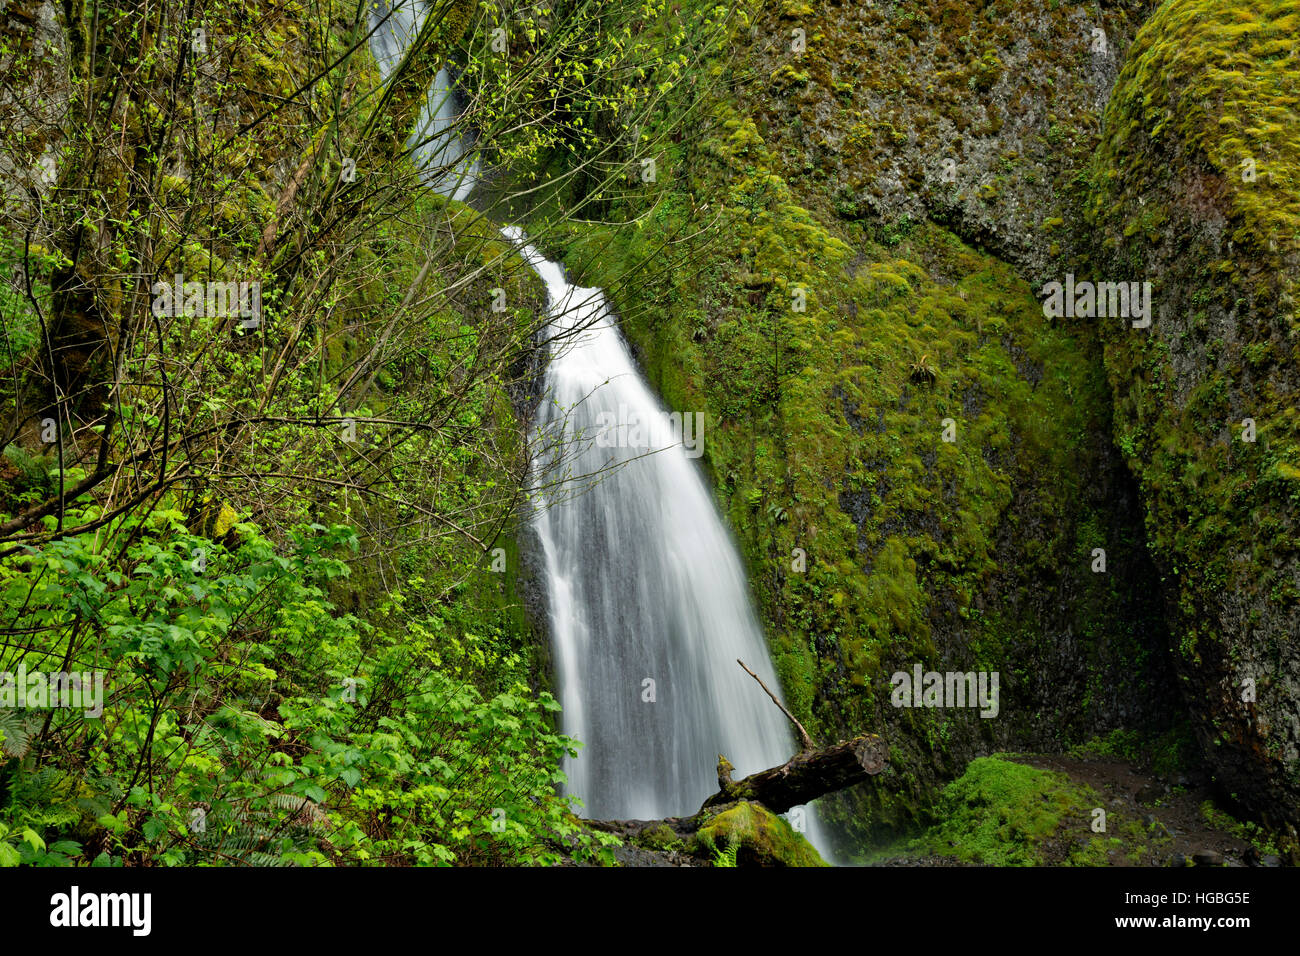 OR02194-00...OREGON - Wahkeena Falls in the Columbia River Gorge National Scenic Area. Stock Photo